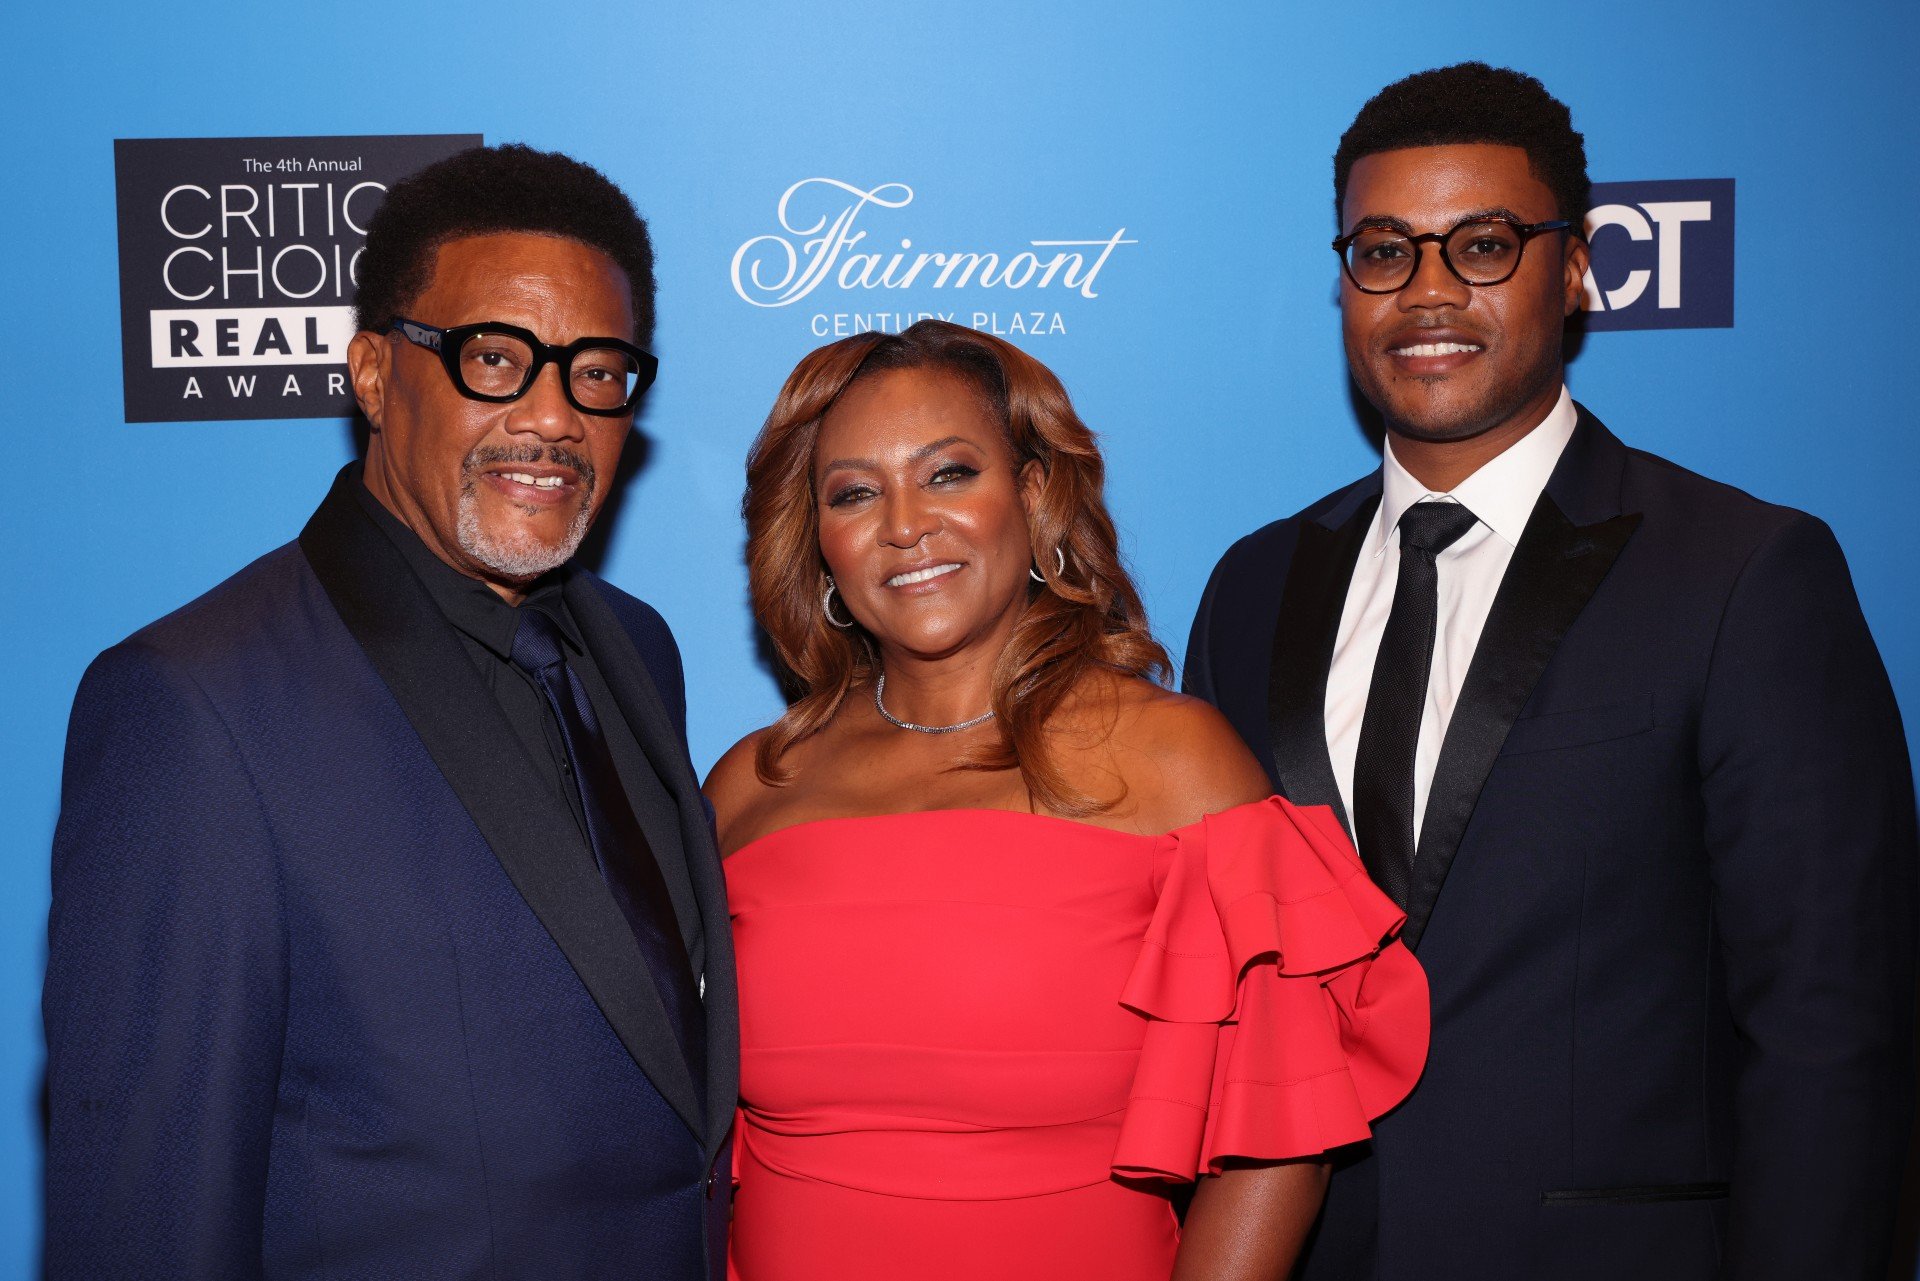 Judge Greg Mathis poses with his wife Linda and son Amira at the Critics Choice Real TV Awards